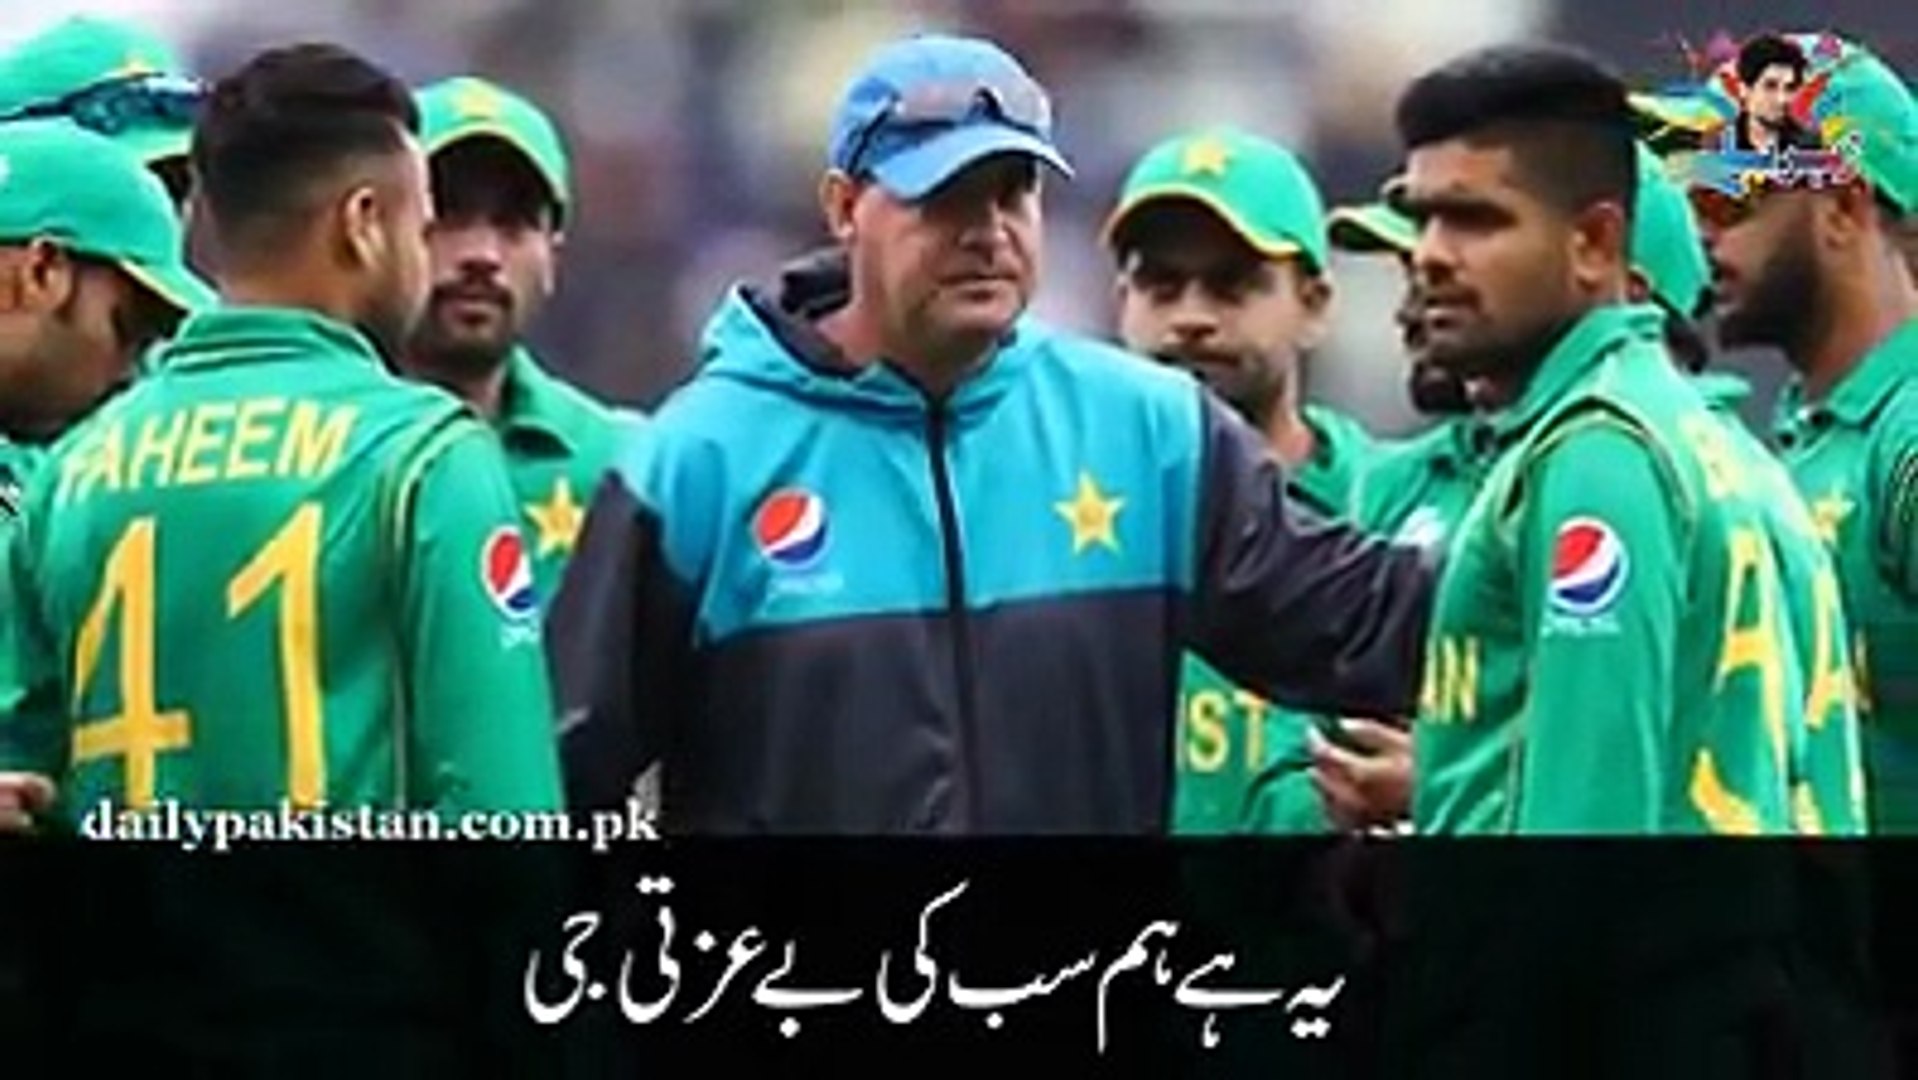 Funny Poetry on Pak India Match